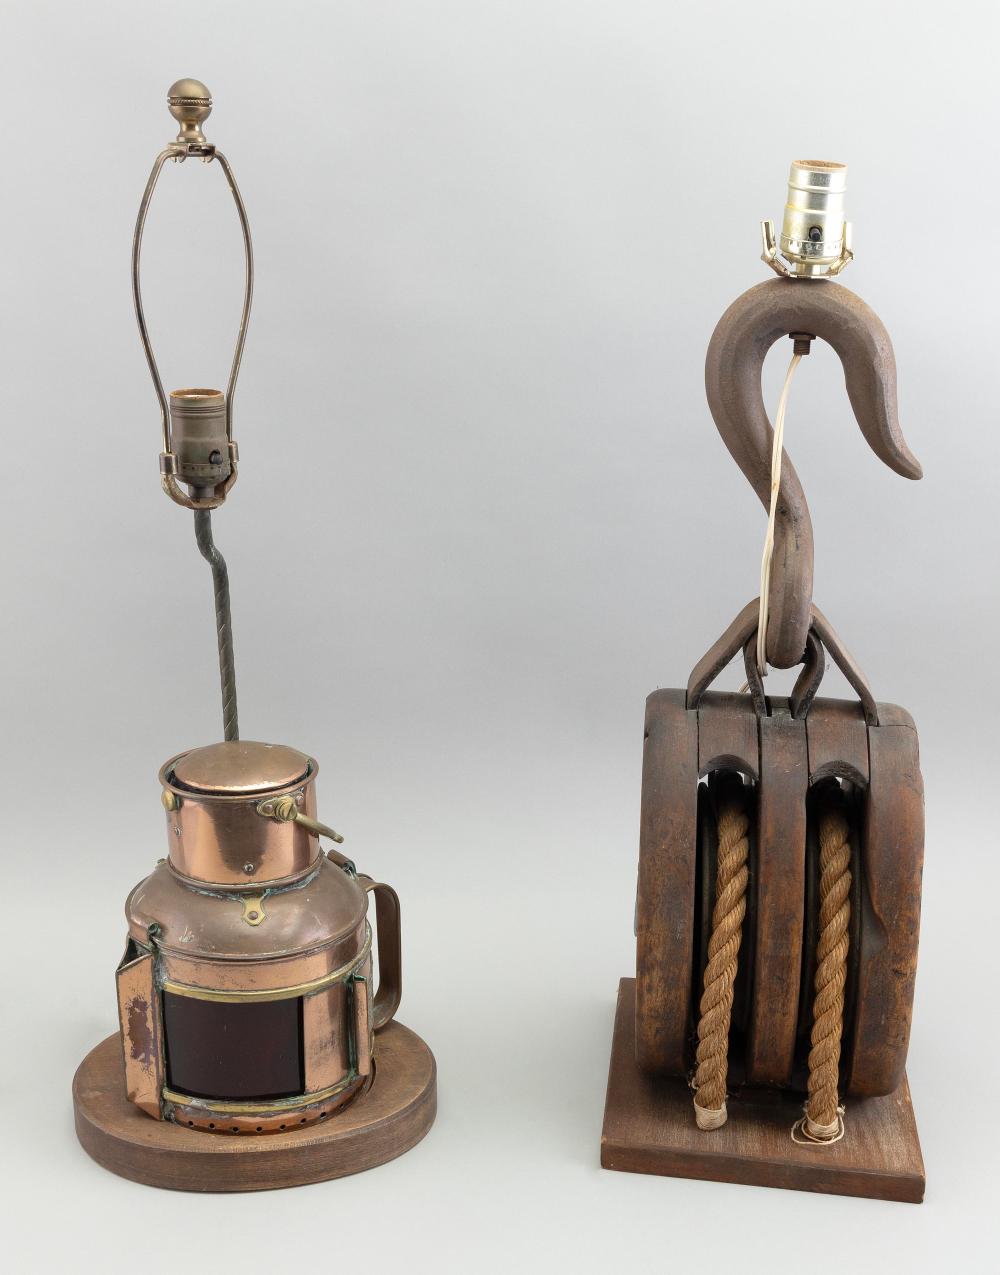 TWO MARITIME-MOTIF TABLE LAMPS